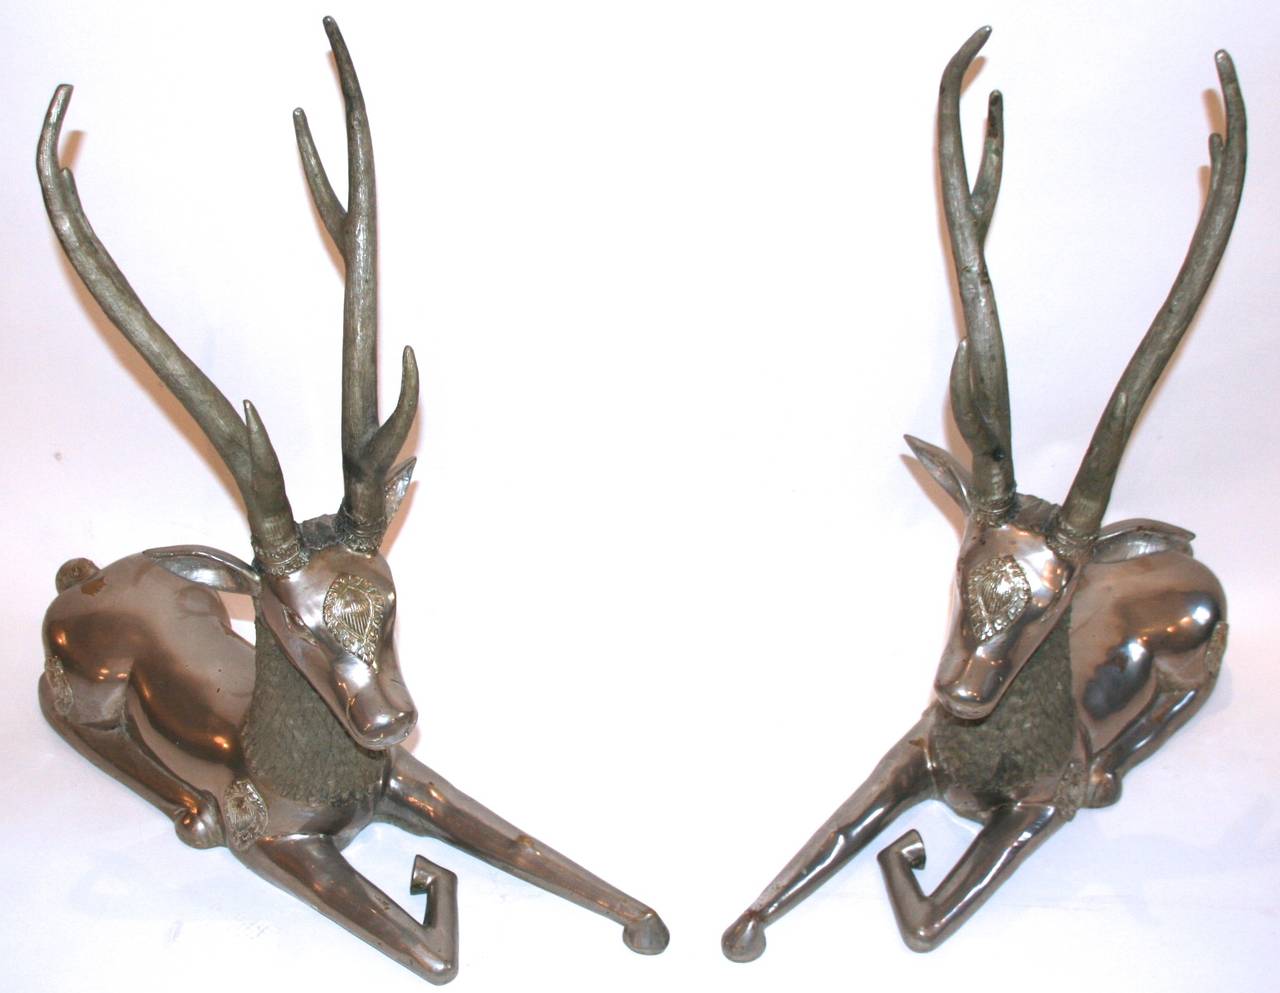 Pair of deer sculpture in the style of Anthony Redmile.
Carved silver bronze,
English, circa 1970.
Measures: Height 85 cm, depth 74 cm, width 22 cm.